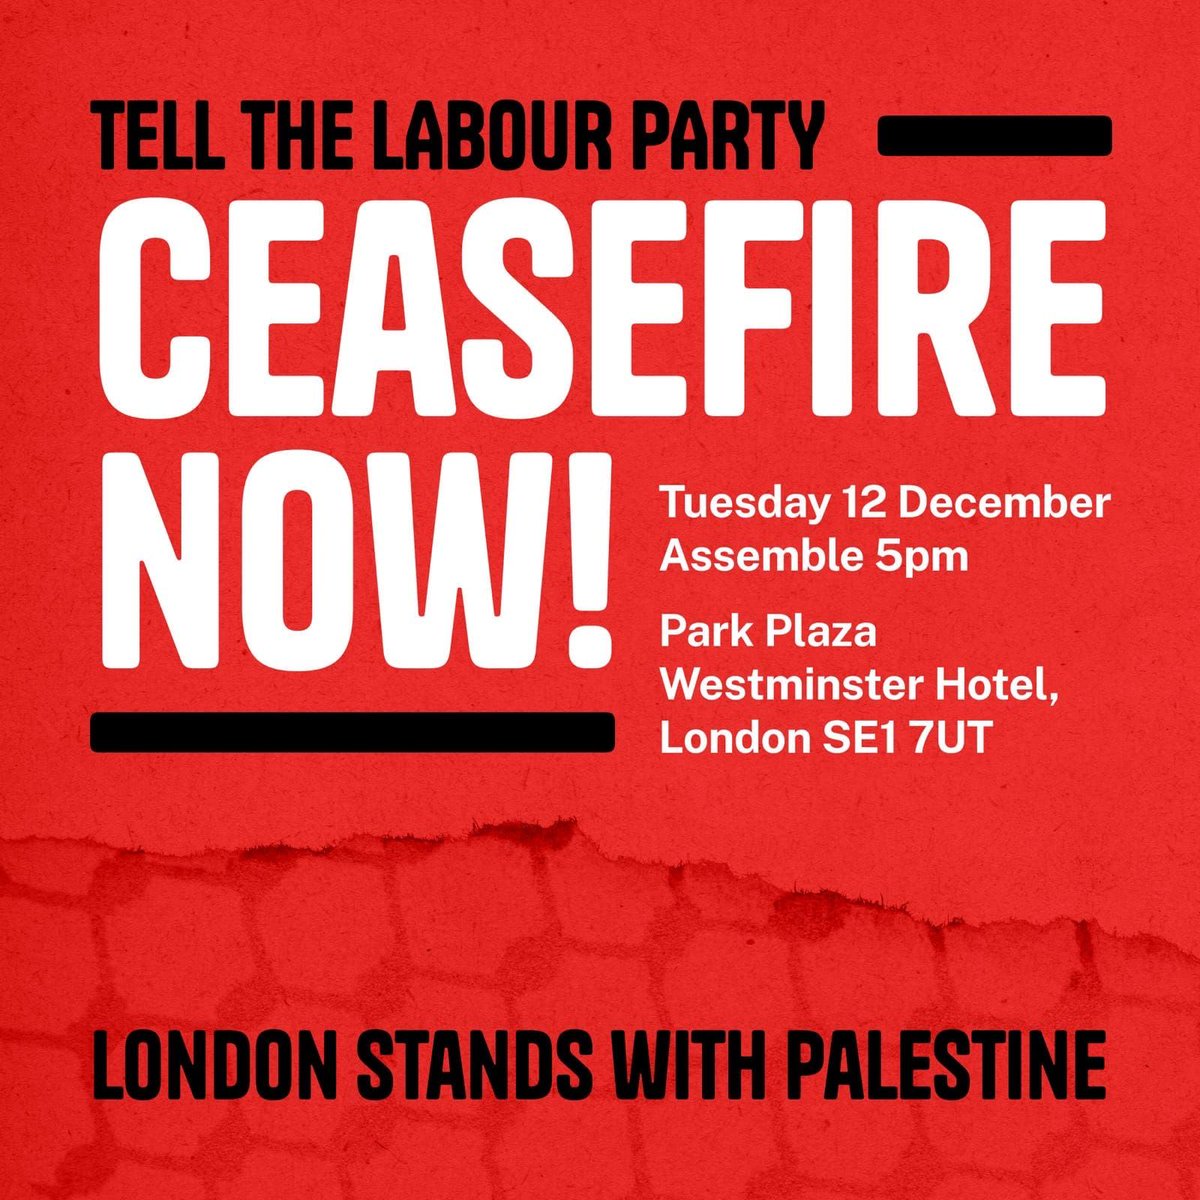 🇵🇸 TELL THE LABOUR PARTY - CEASEFIRE NOW! 🇵🇸 📣 TONIGHT: David Lammy, Angela Rayner & Yvette Cooper are speaking at a Labour business event. 📣 Turn-up to demand that Labour call for an immediate #CeasefireNOW Assemble 5pm at the Park Plaza Westminster Hotel, SE1 7UZ